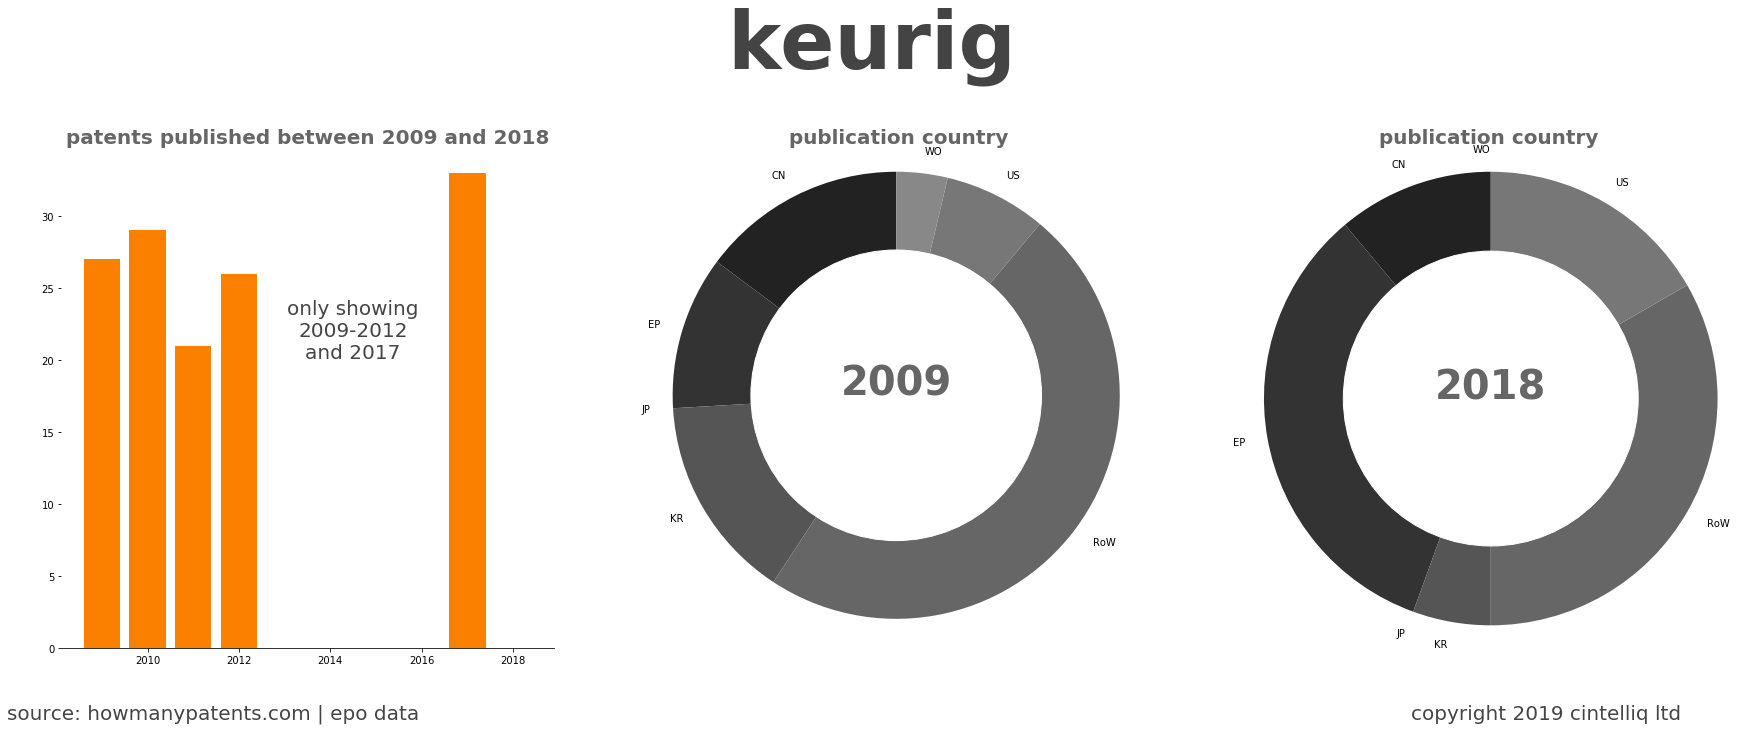 summary of patents for Keurig